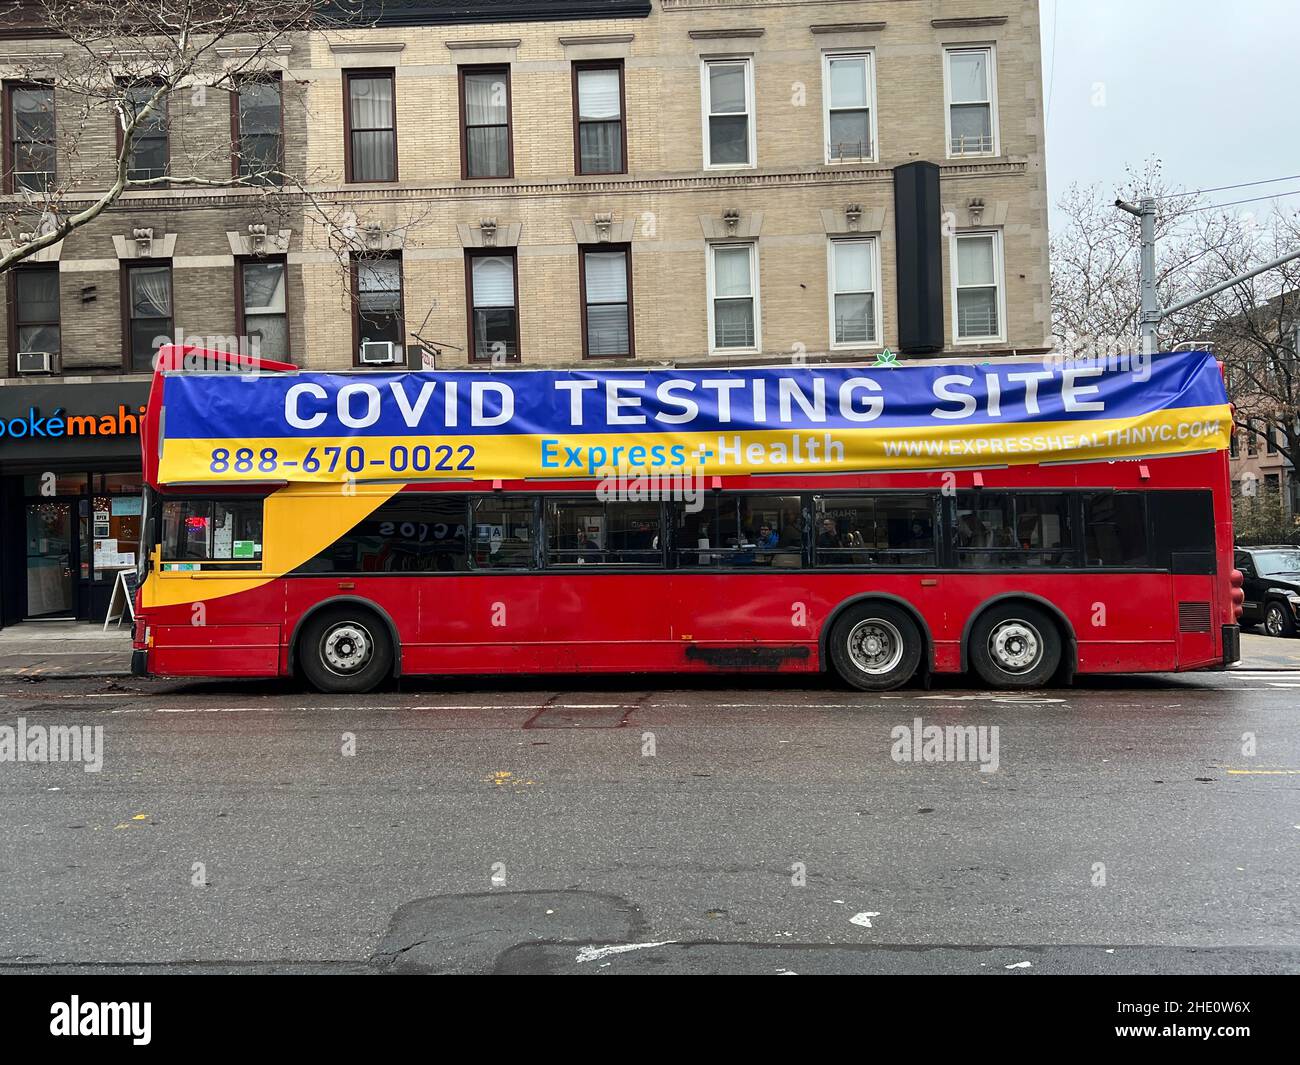 The number and variety of Covid-19 testing sites, both storefronts and mobile, seem to indicate an expanding business sector in. New York City. Fully equipped testing bus parked on the street in Brooklyn, New York. Stock Photo